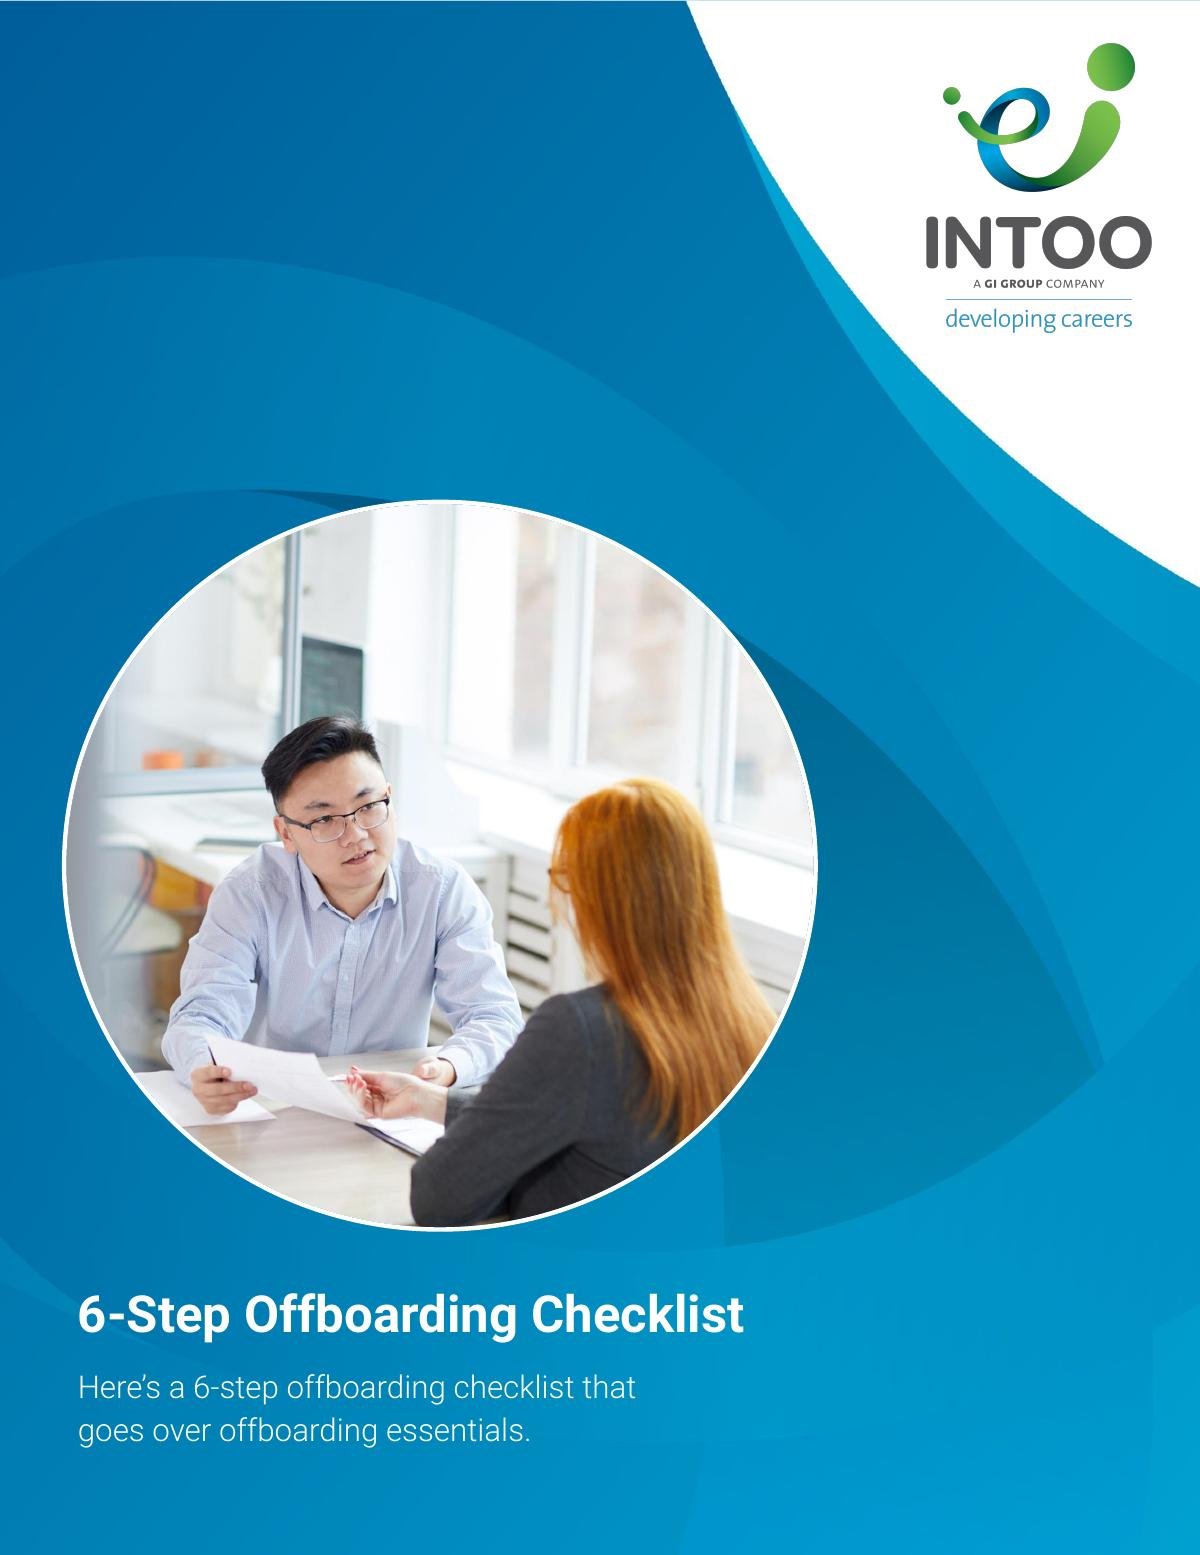  6-step Checklist to Build a Successful Offboarding Process